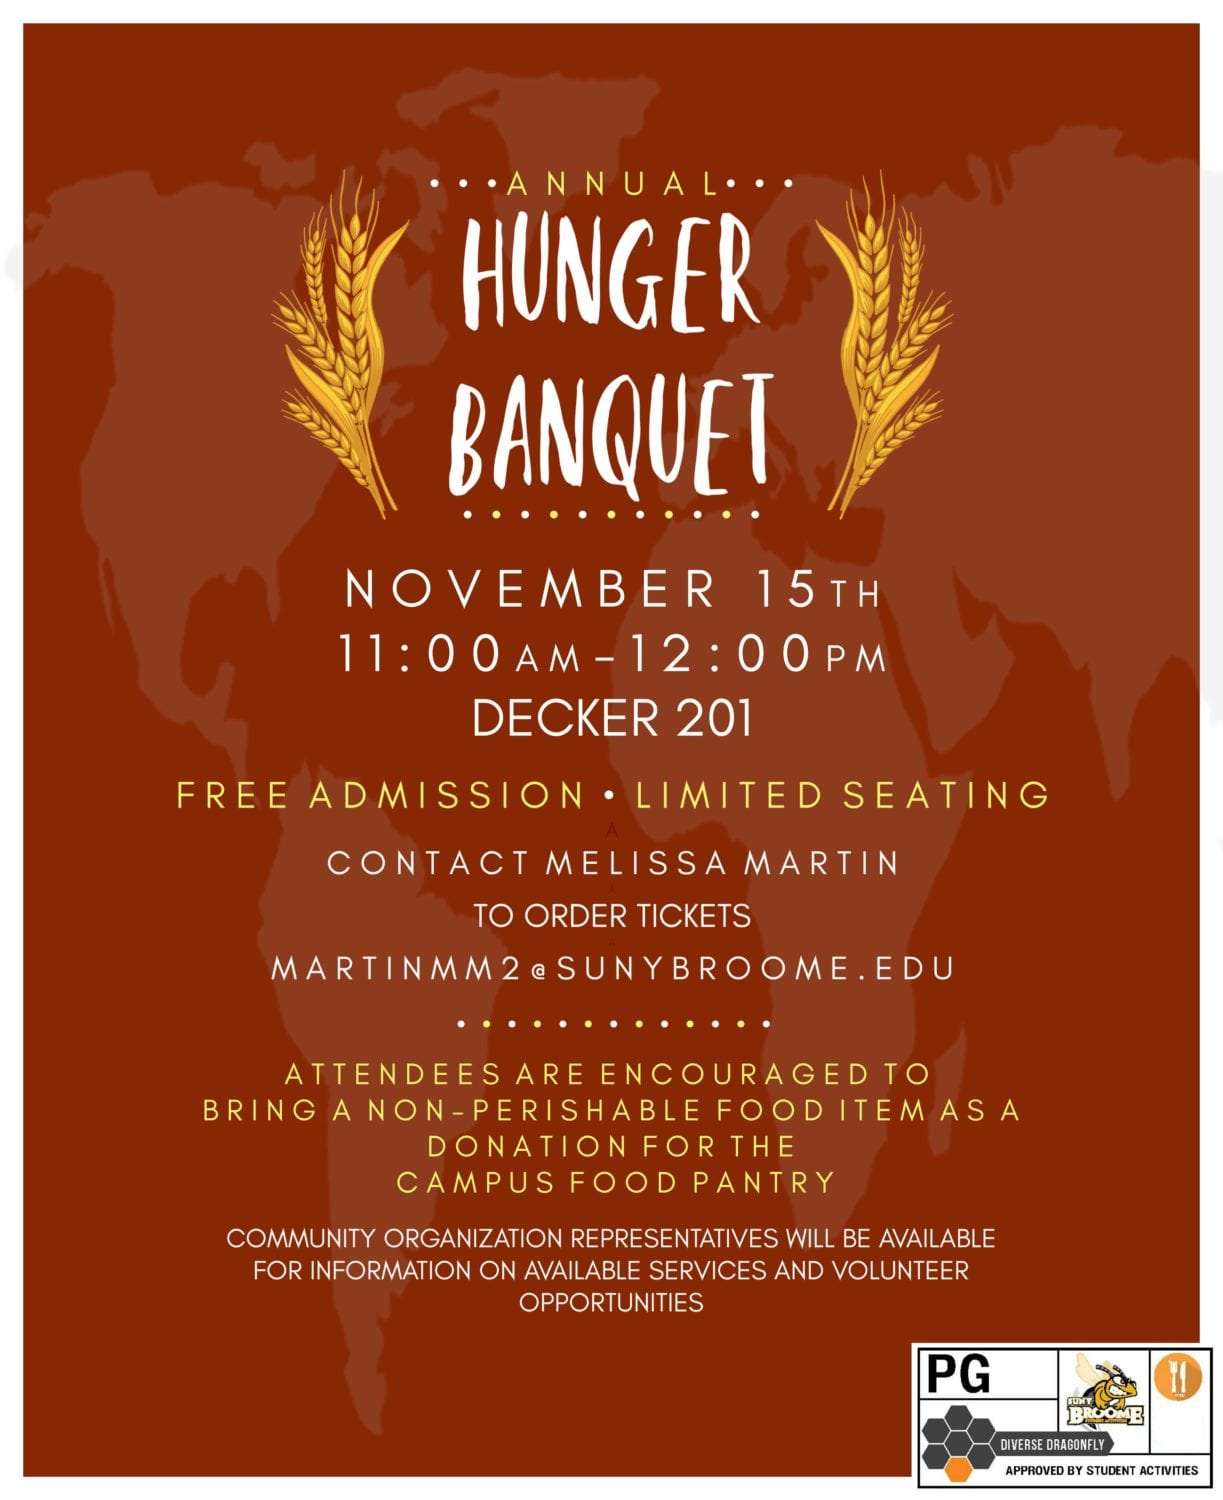 Not just a free lunch: Join us for the Hunger Banquet on Nov. 15